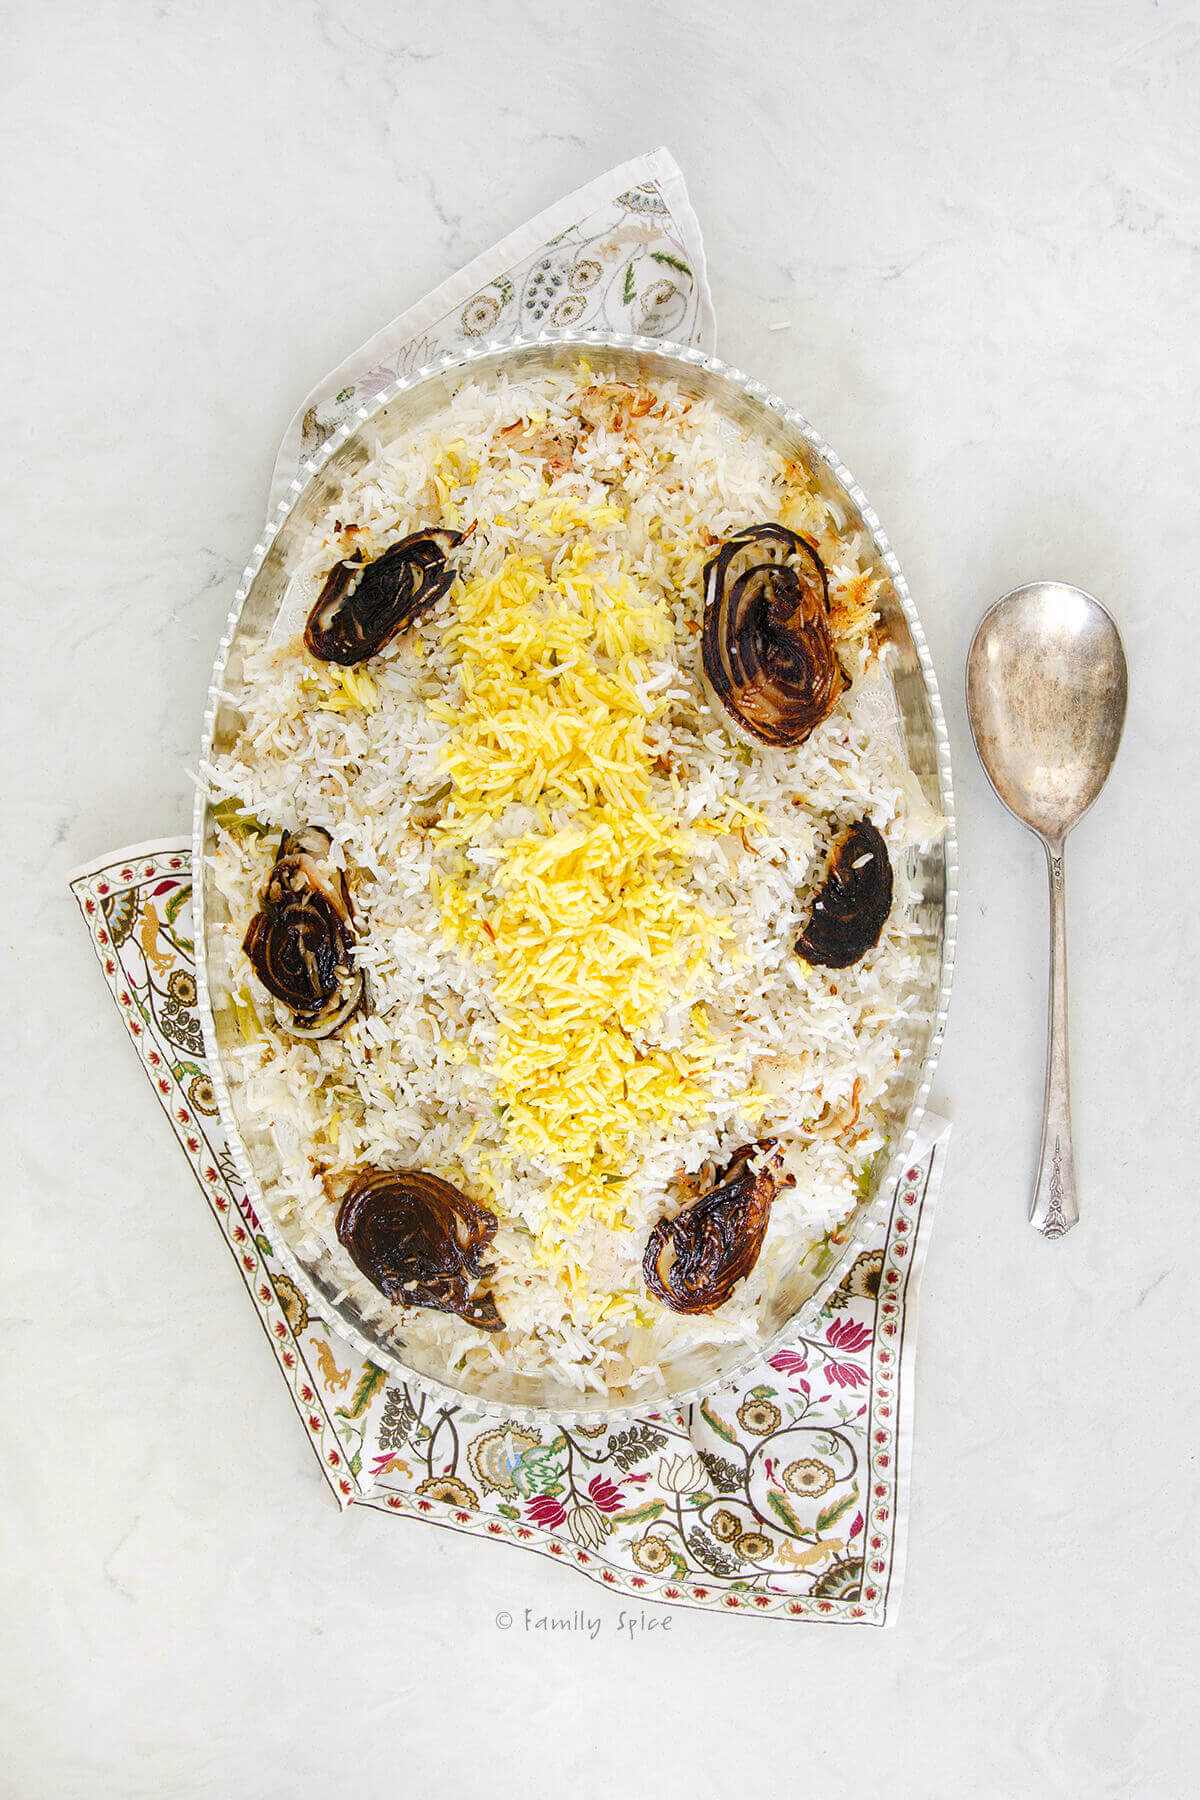 Top view of cabbage rice (kalam polo) with onion tadigh on a silver oval platter with a serving spoon next to it